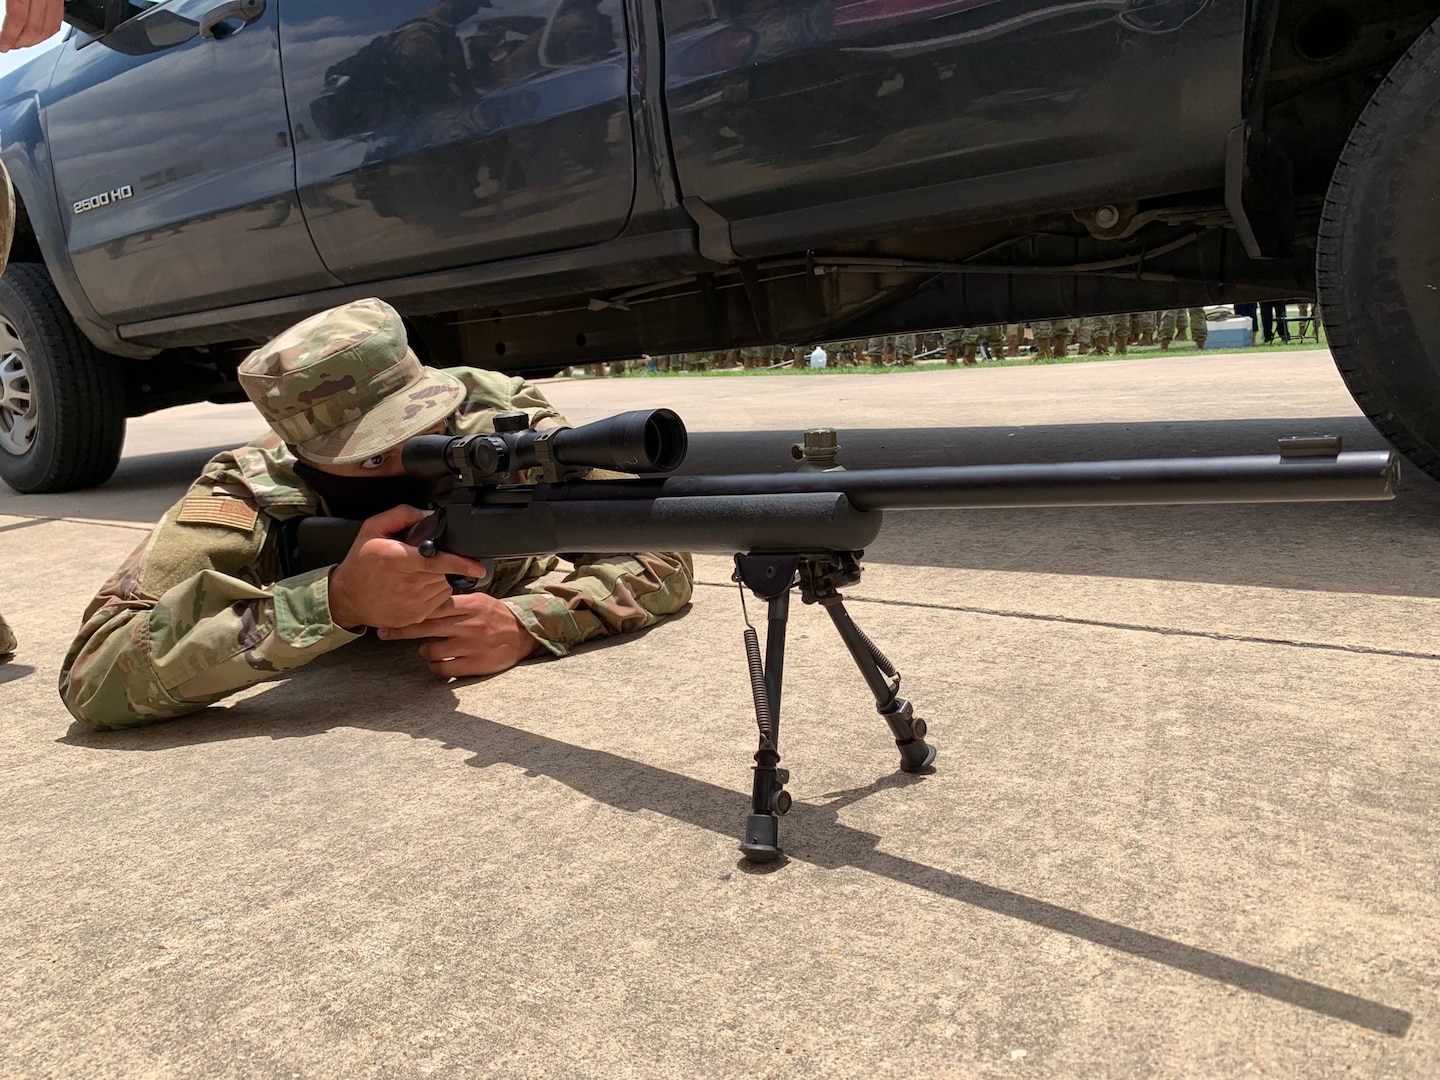 Airman lying on ground looking through rifle scope.